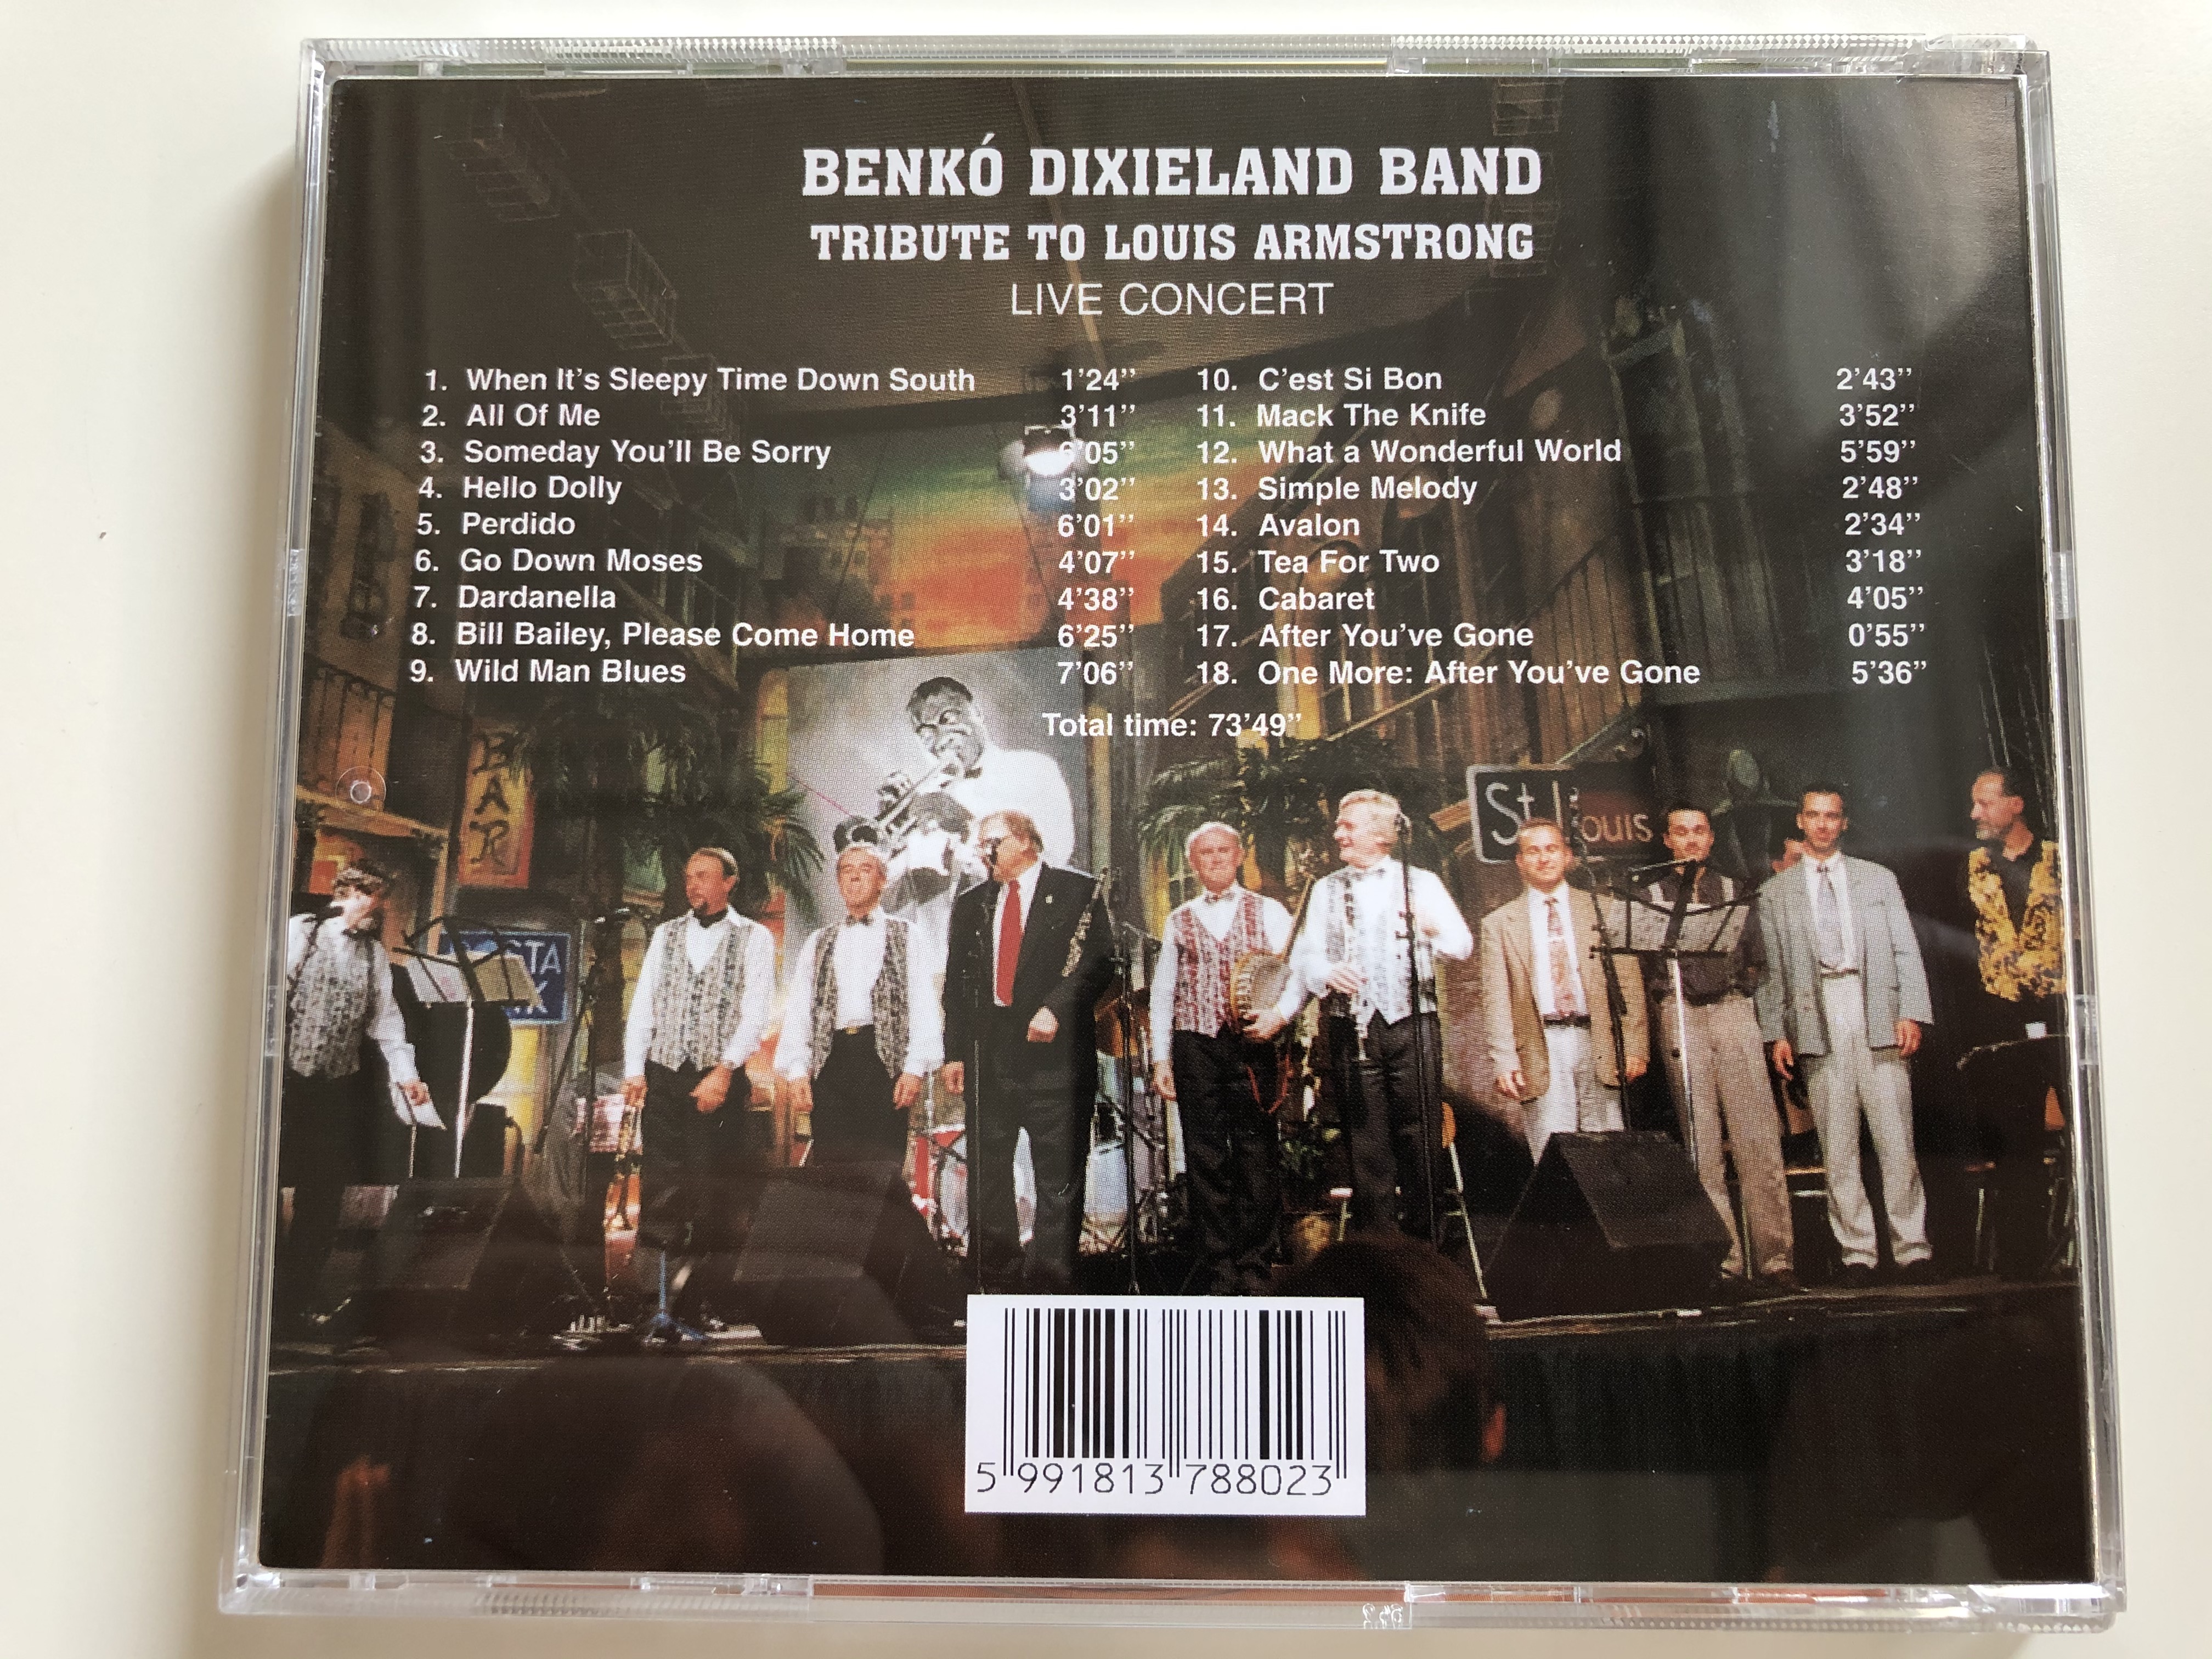 benko-dixieland-band-tribute-to-louis-armstrong-live-concert-gong-audio-cd-1997-hcd-37880-8-.jpg